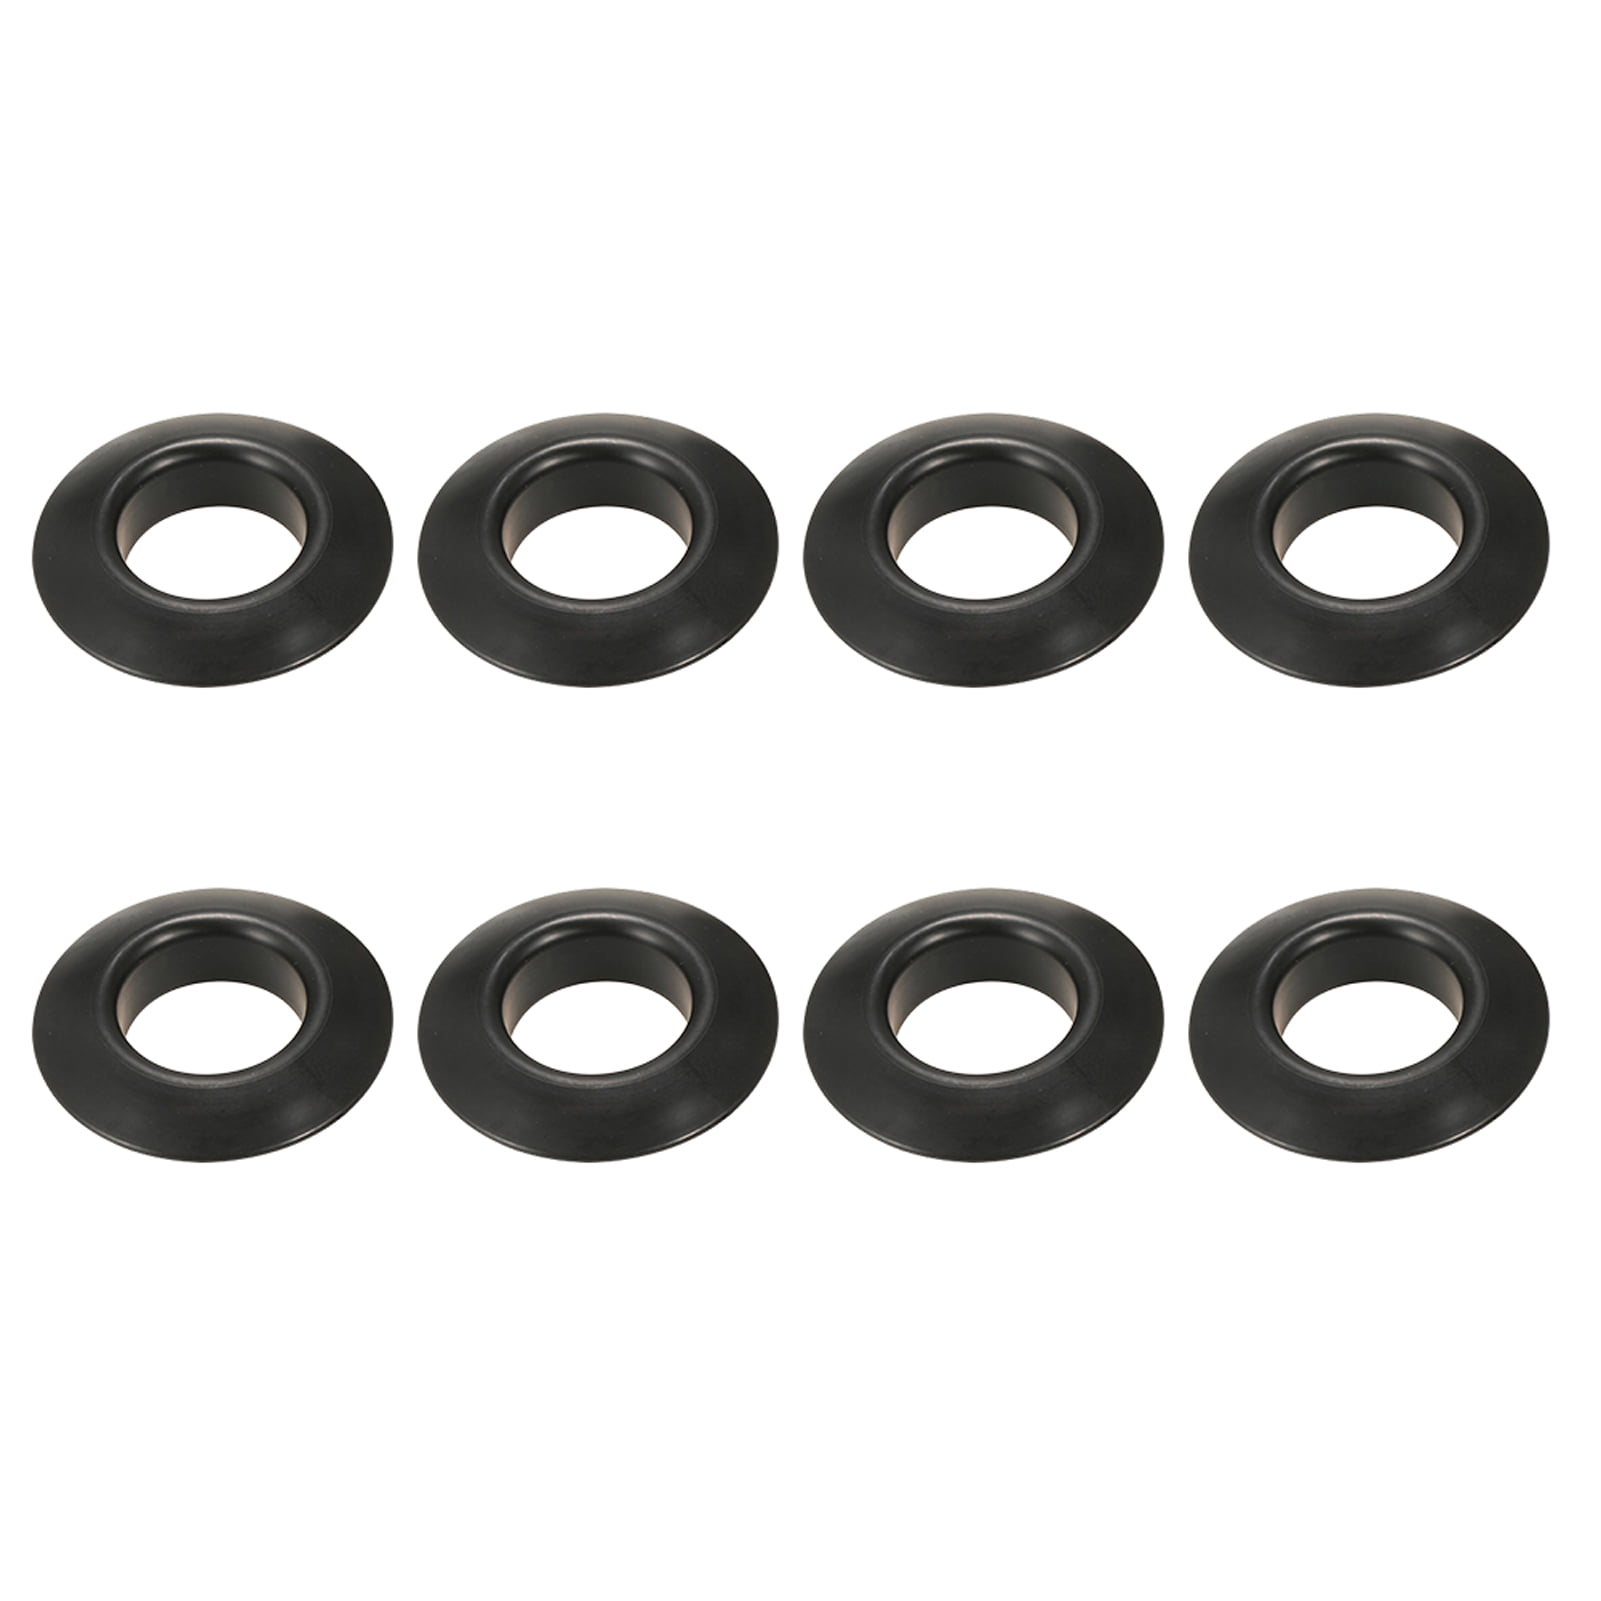 Drip Ring Replacement Splash Guards Propel Paddle Parts Kayak Oar Accessories 